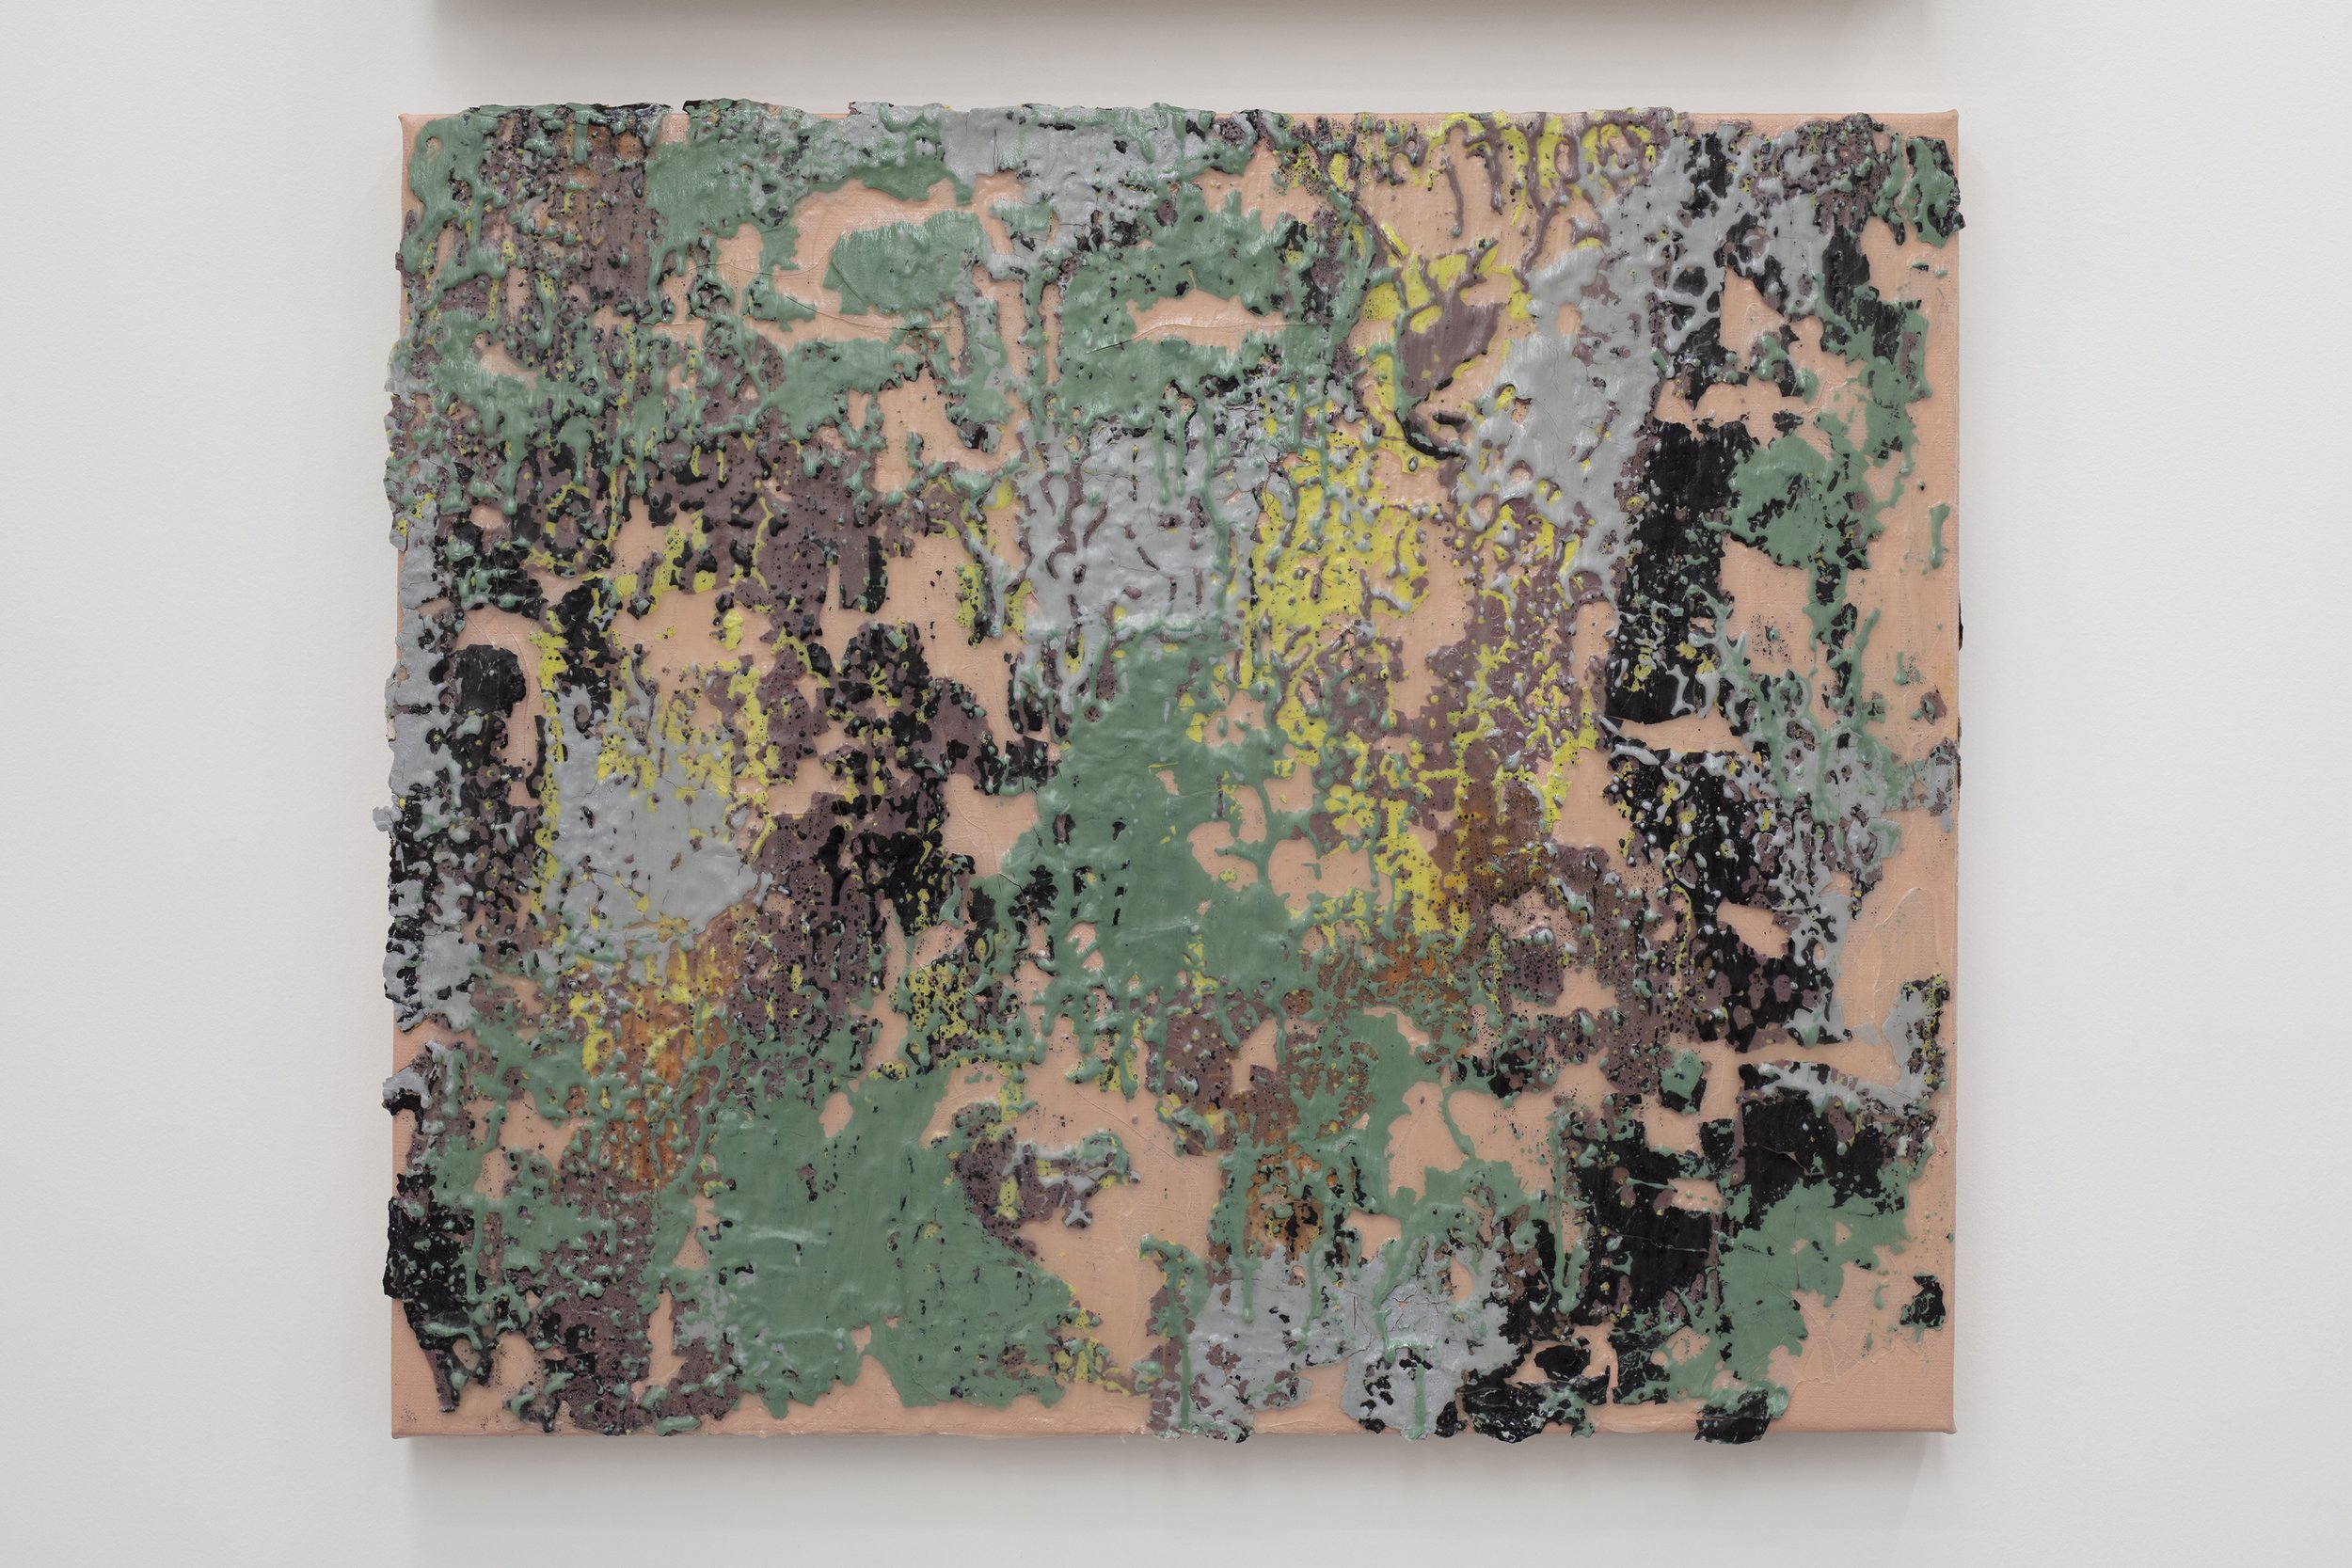  Jorge Elbrecht,  Repulsion Shelter (Dispersed) , 2022. Mixed media on linen, 22 x 25.5 x 2 inches (56 x 65 x 10 cm). 